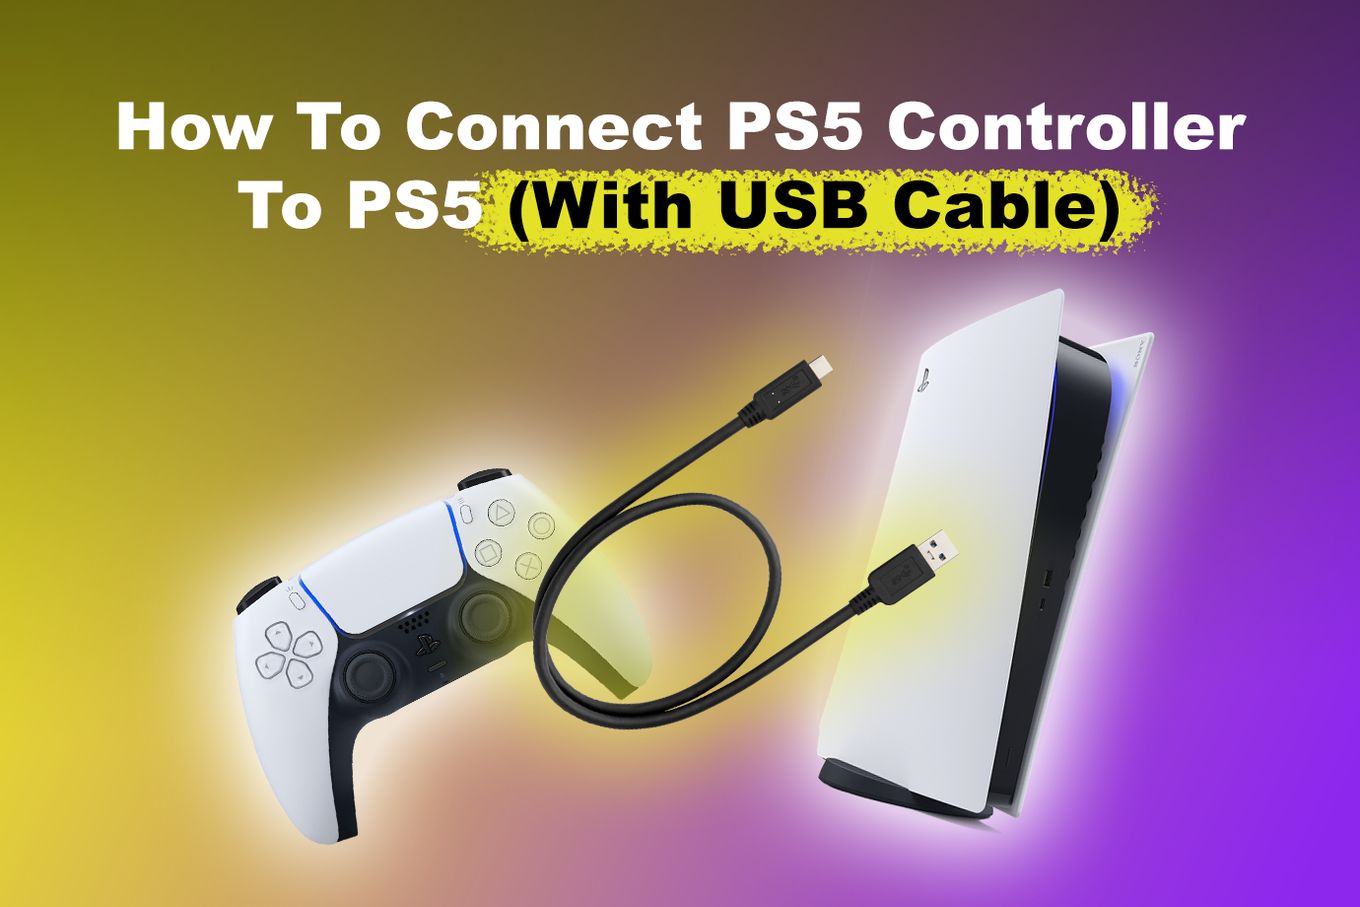 Ensure the controller is properly connected:
Use a different USB cable to connect the controller to the console.